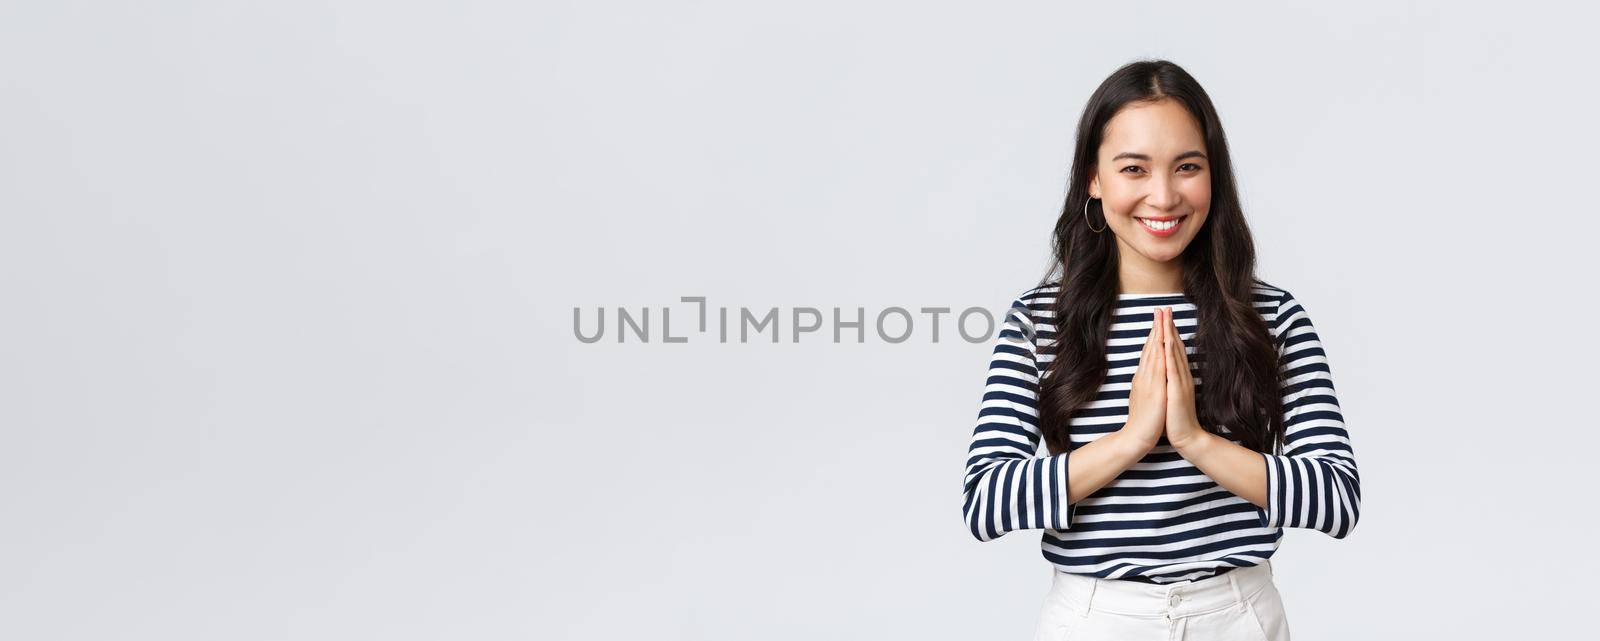 Lifestyle, people emotions and casual concept. Cute asian girl in casual outfit smiling as saying namaste, holding hands in pray, pleading or greeting guests with polite bow.